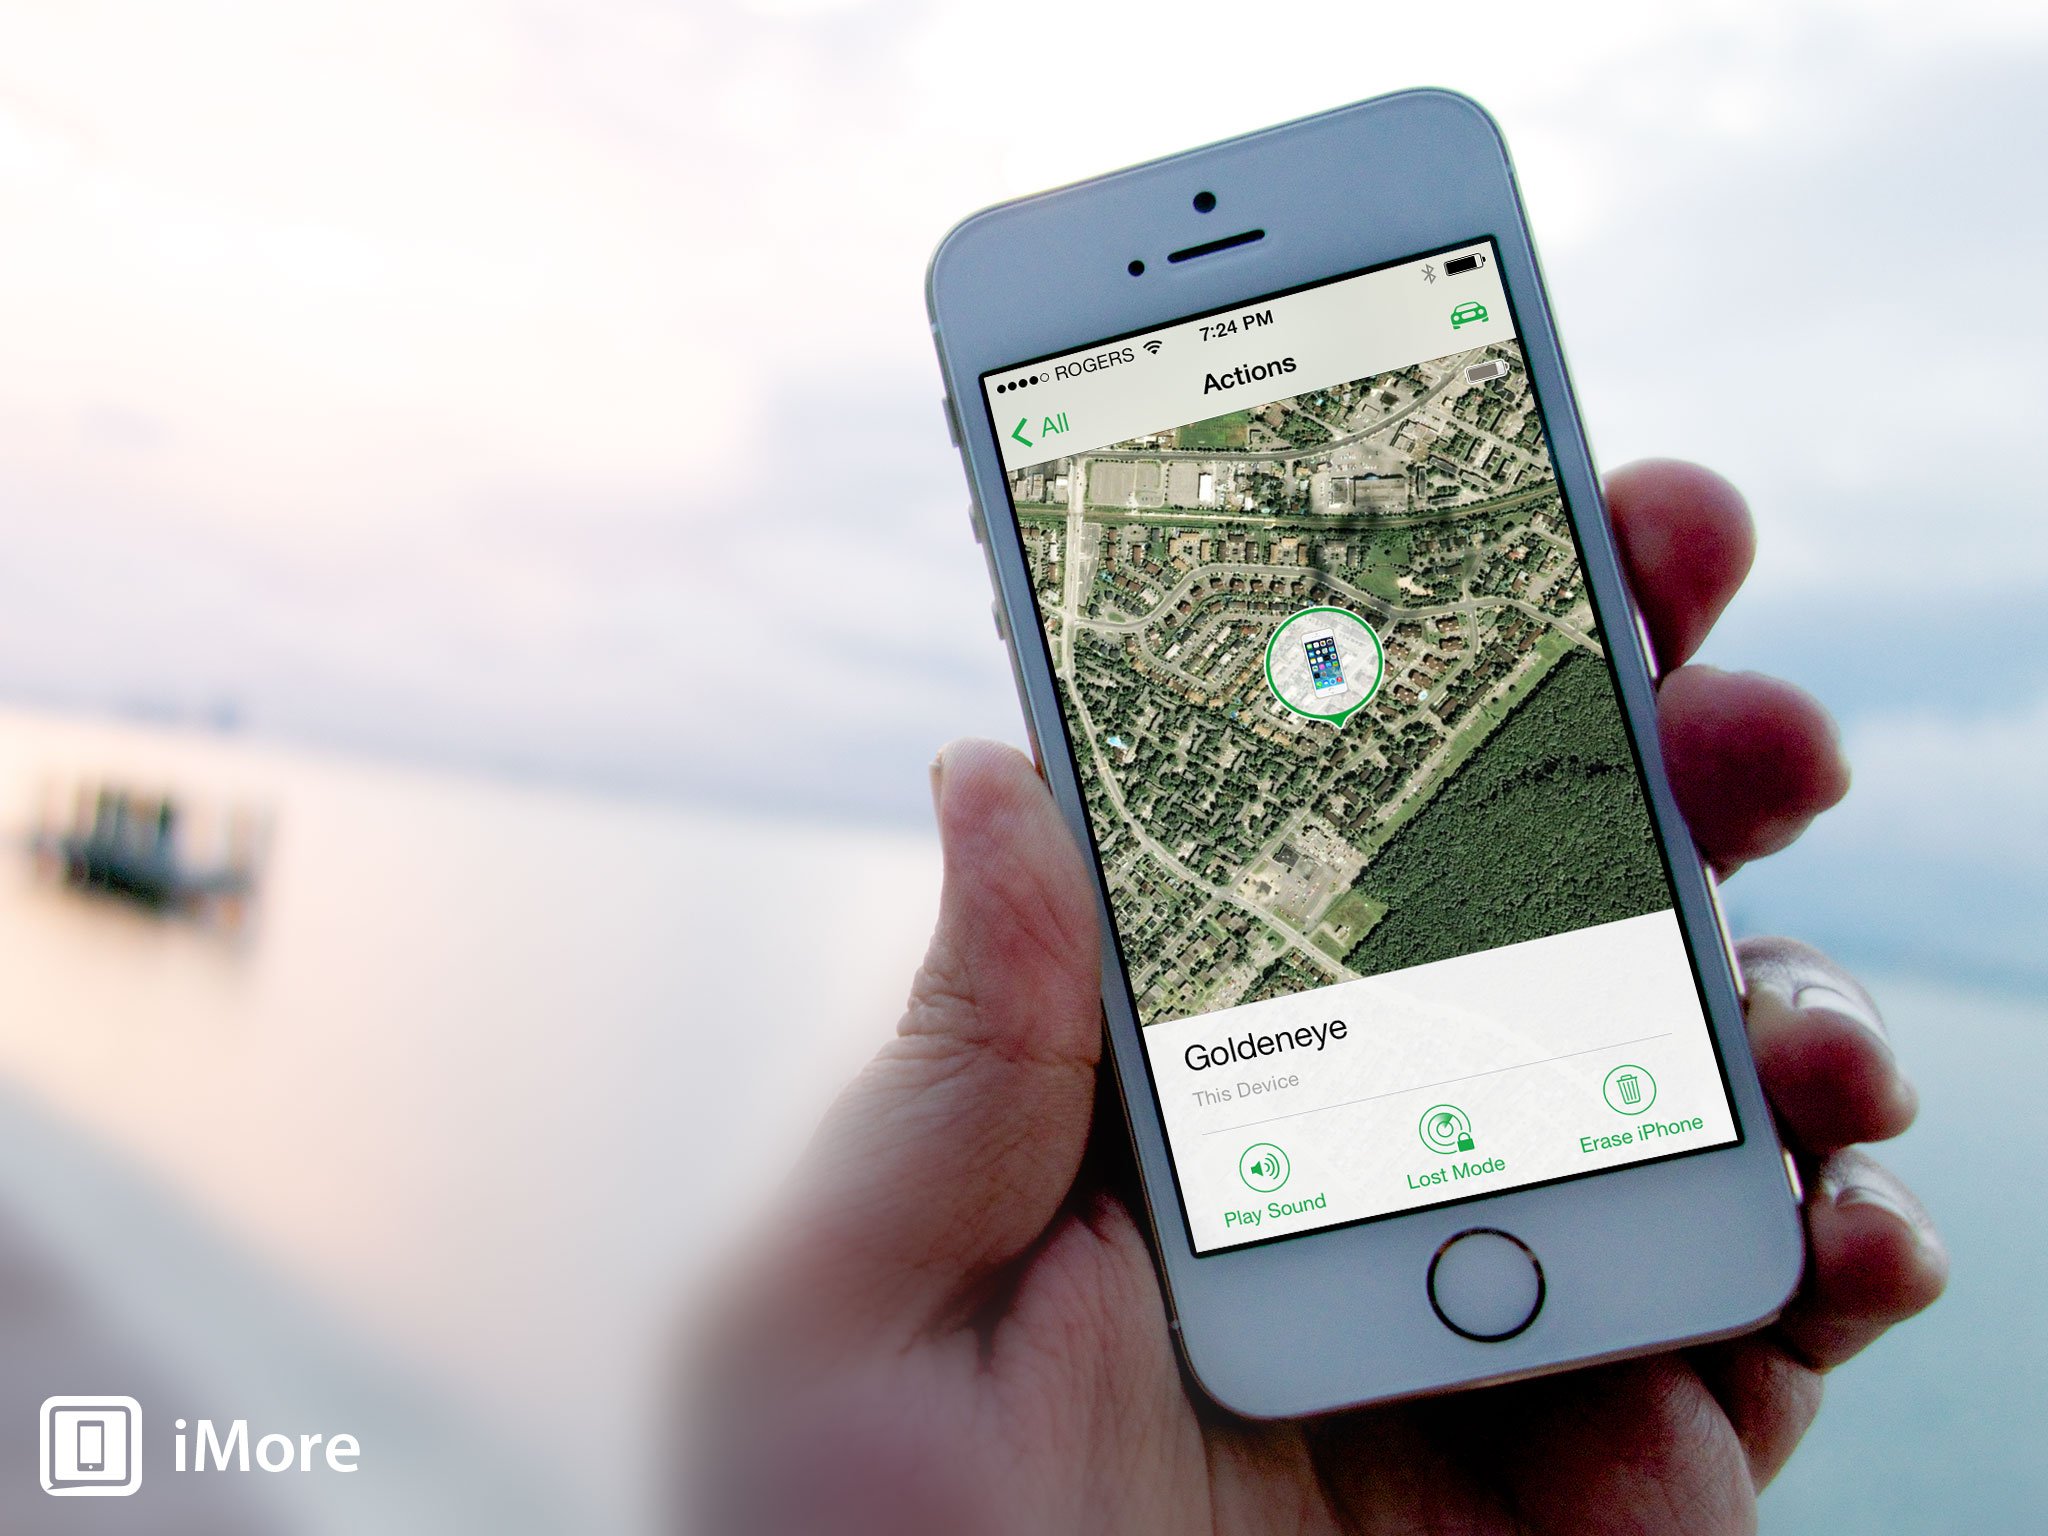 Apple updates Find my iPhone for iOS 7